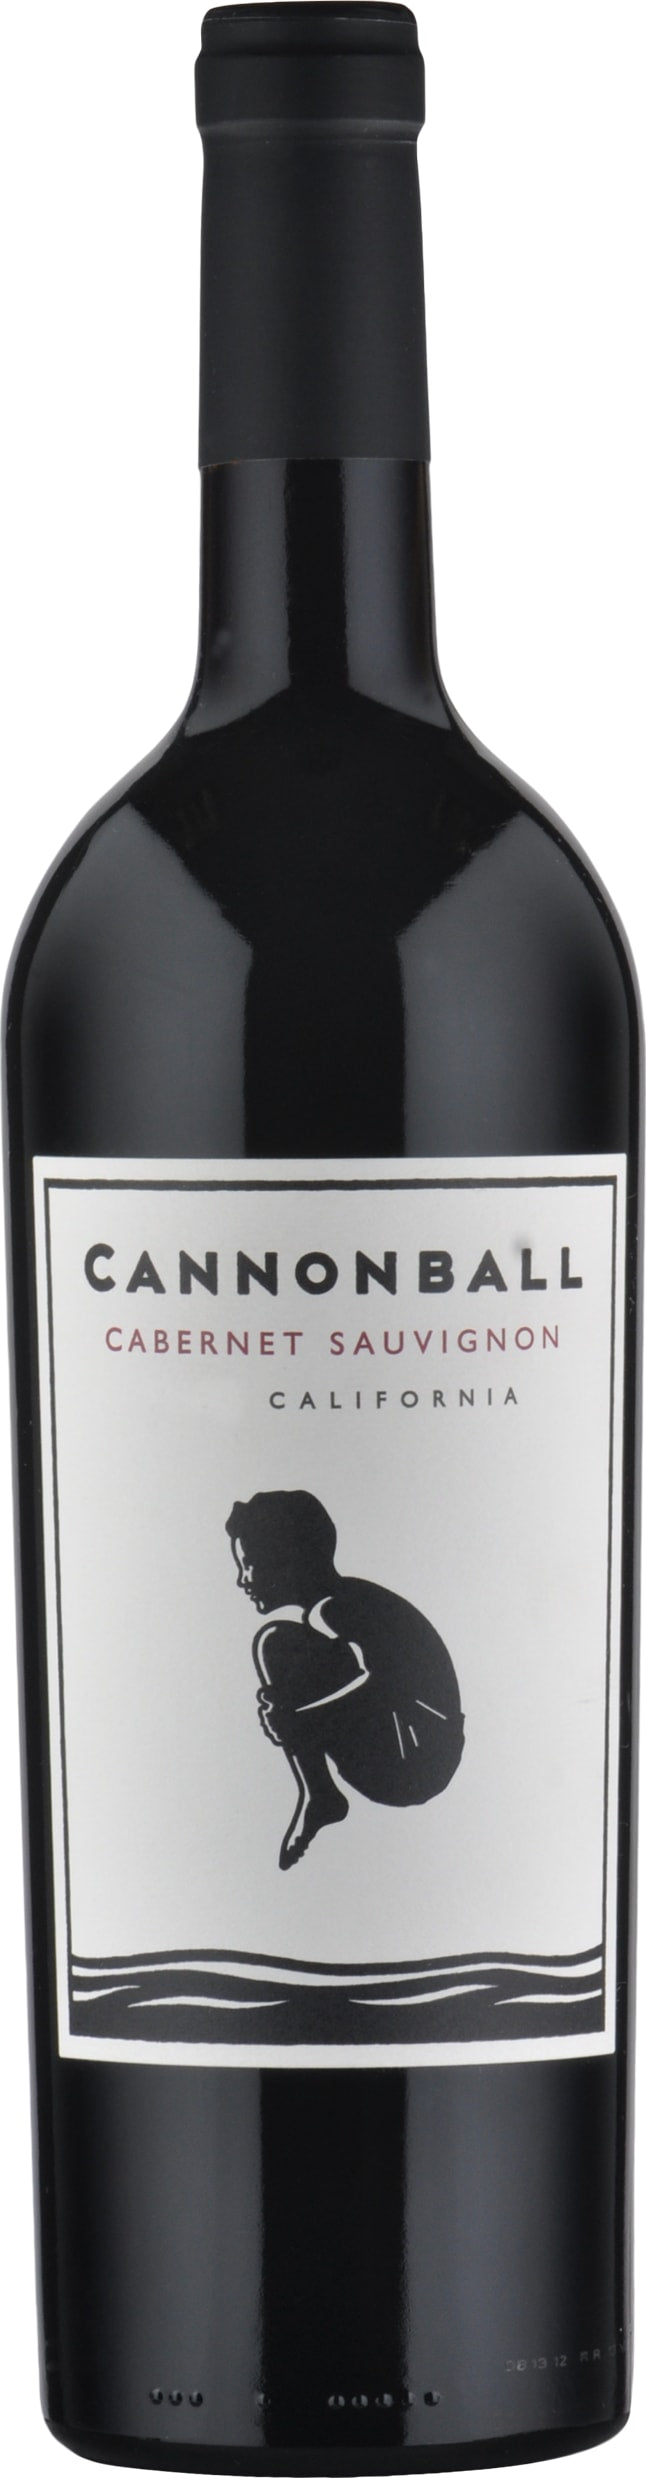 Cannonball Cabernet Sauvignon Half Bottle 2018 37.5cl - Buy Cannonball Wines from GREAT WINES DIRECT wine shop